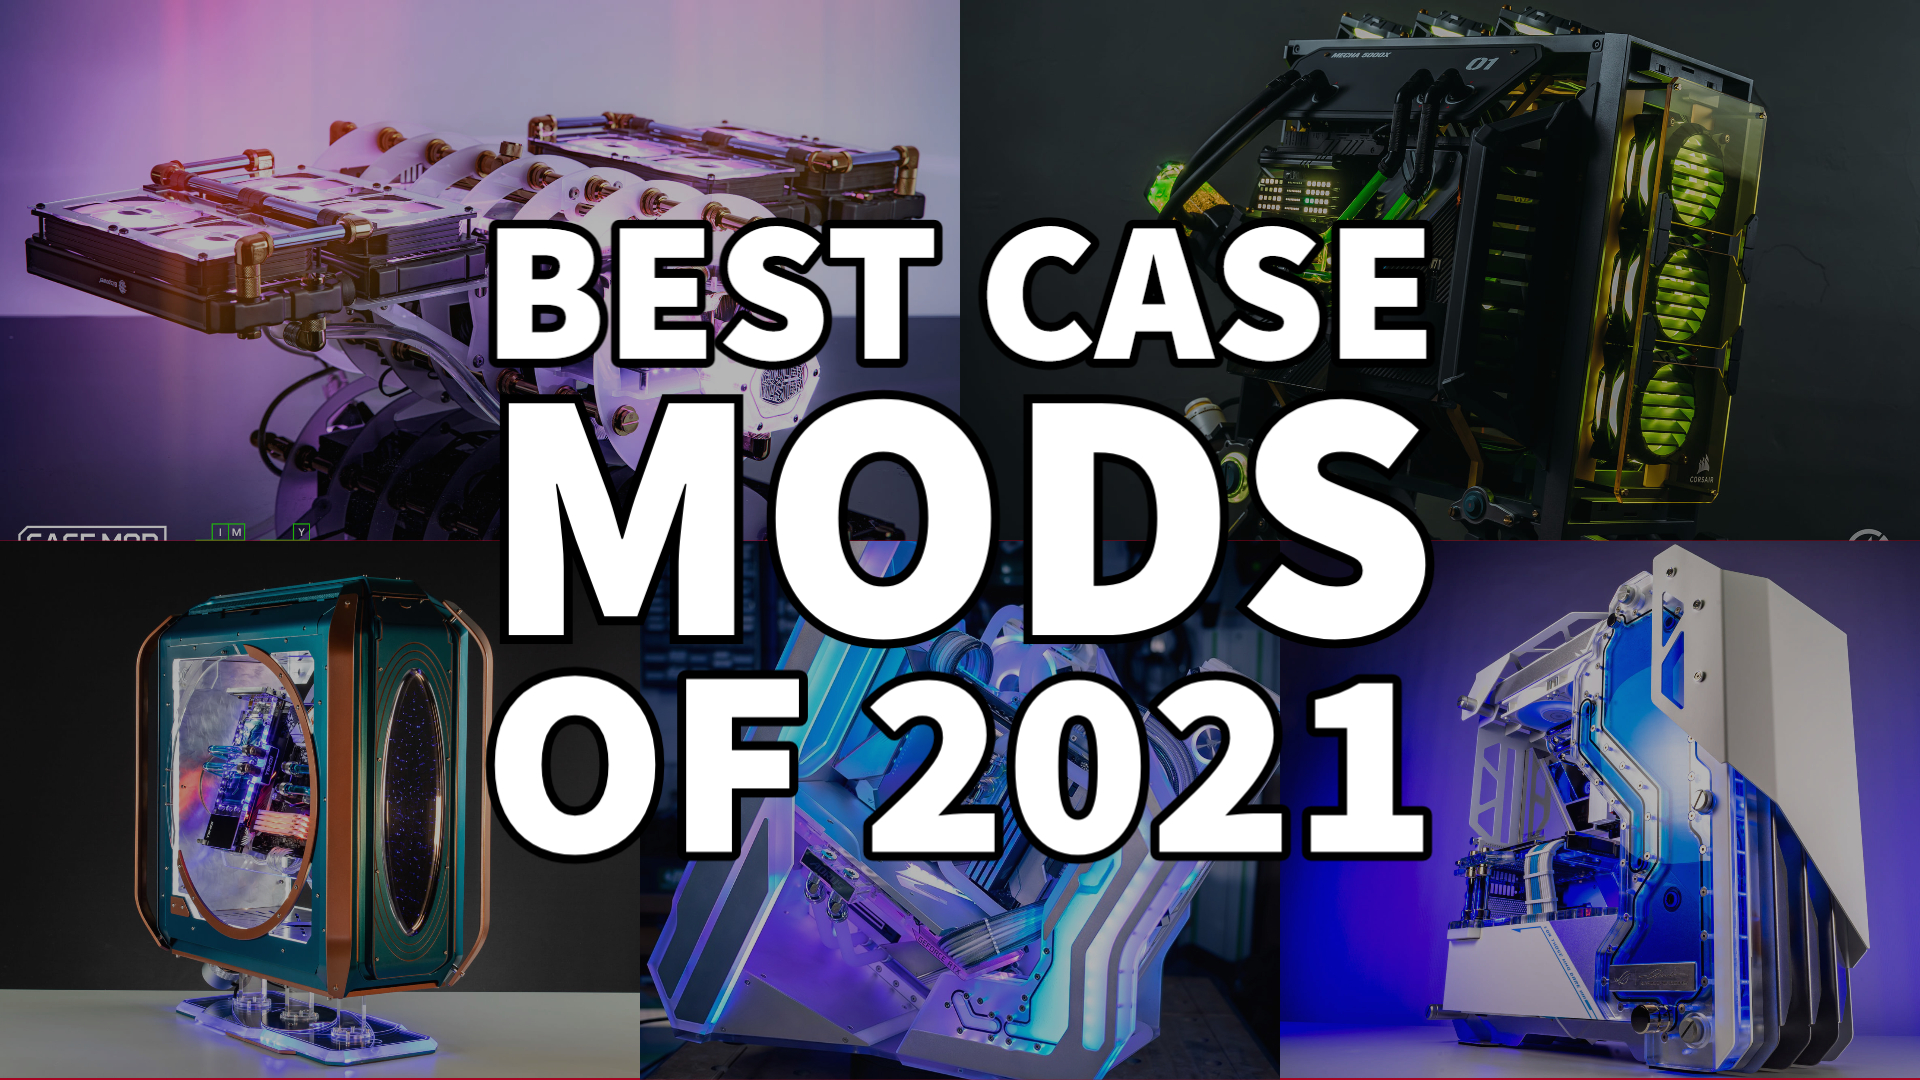 The Best Case Mods of 2021!